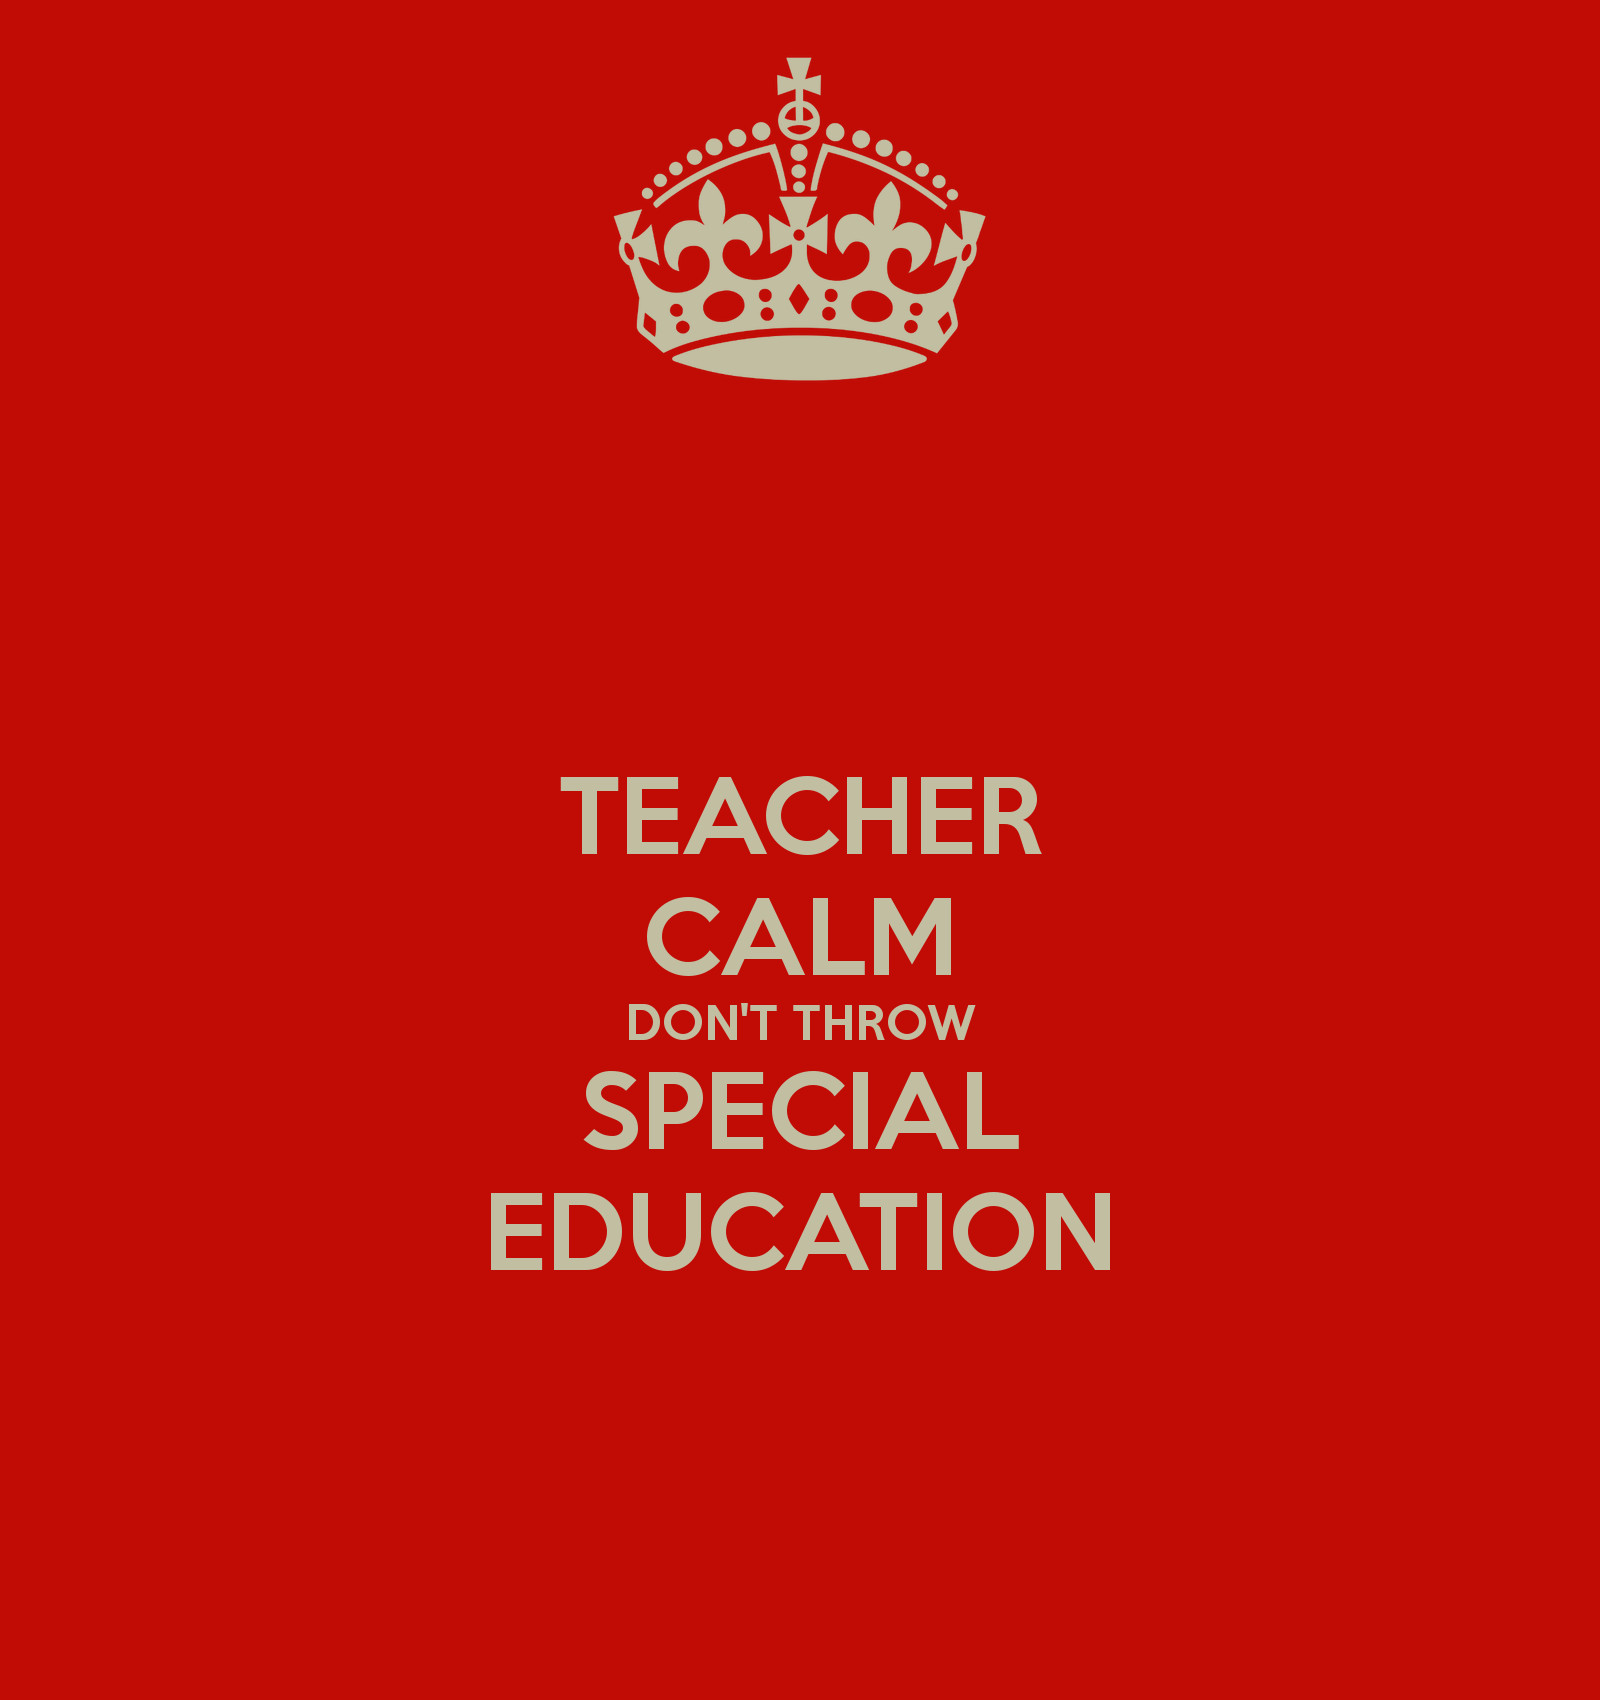 Special Education Teacher Quotes
 Special Education Teacher Quotes QuotesGram